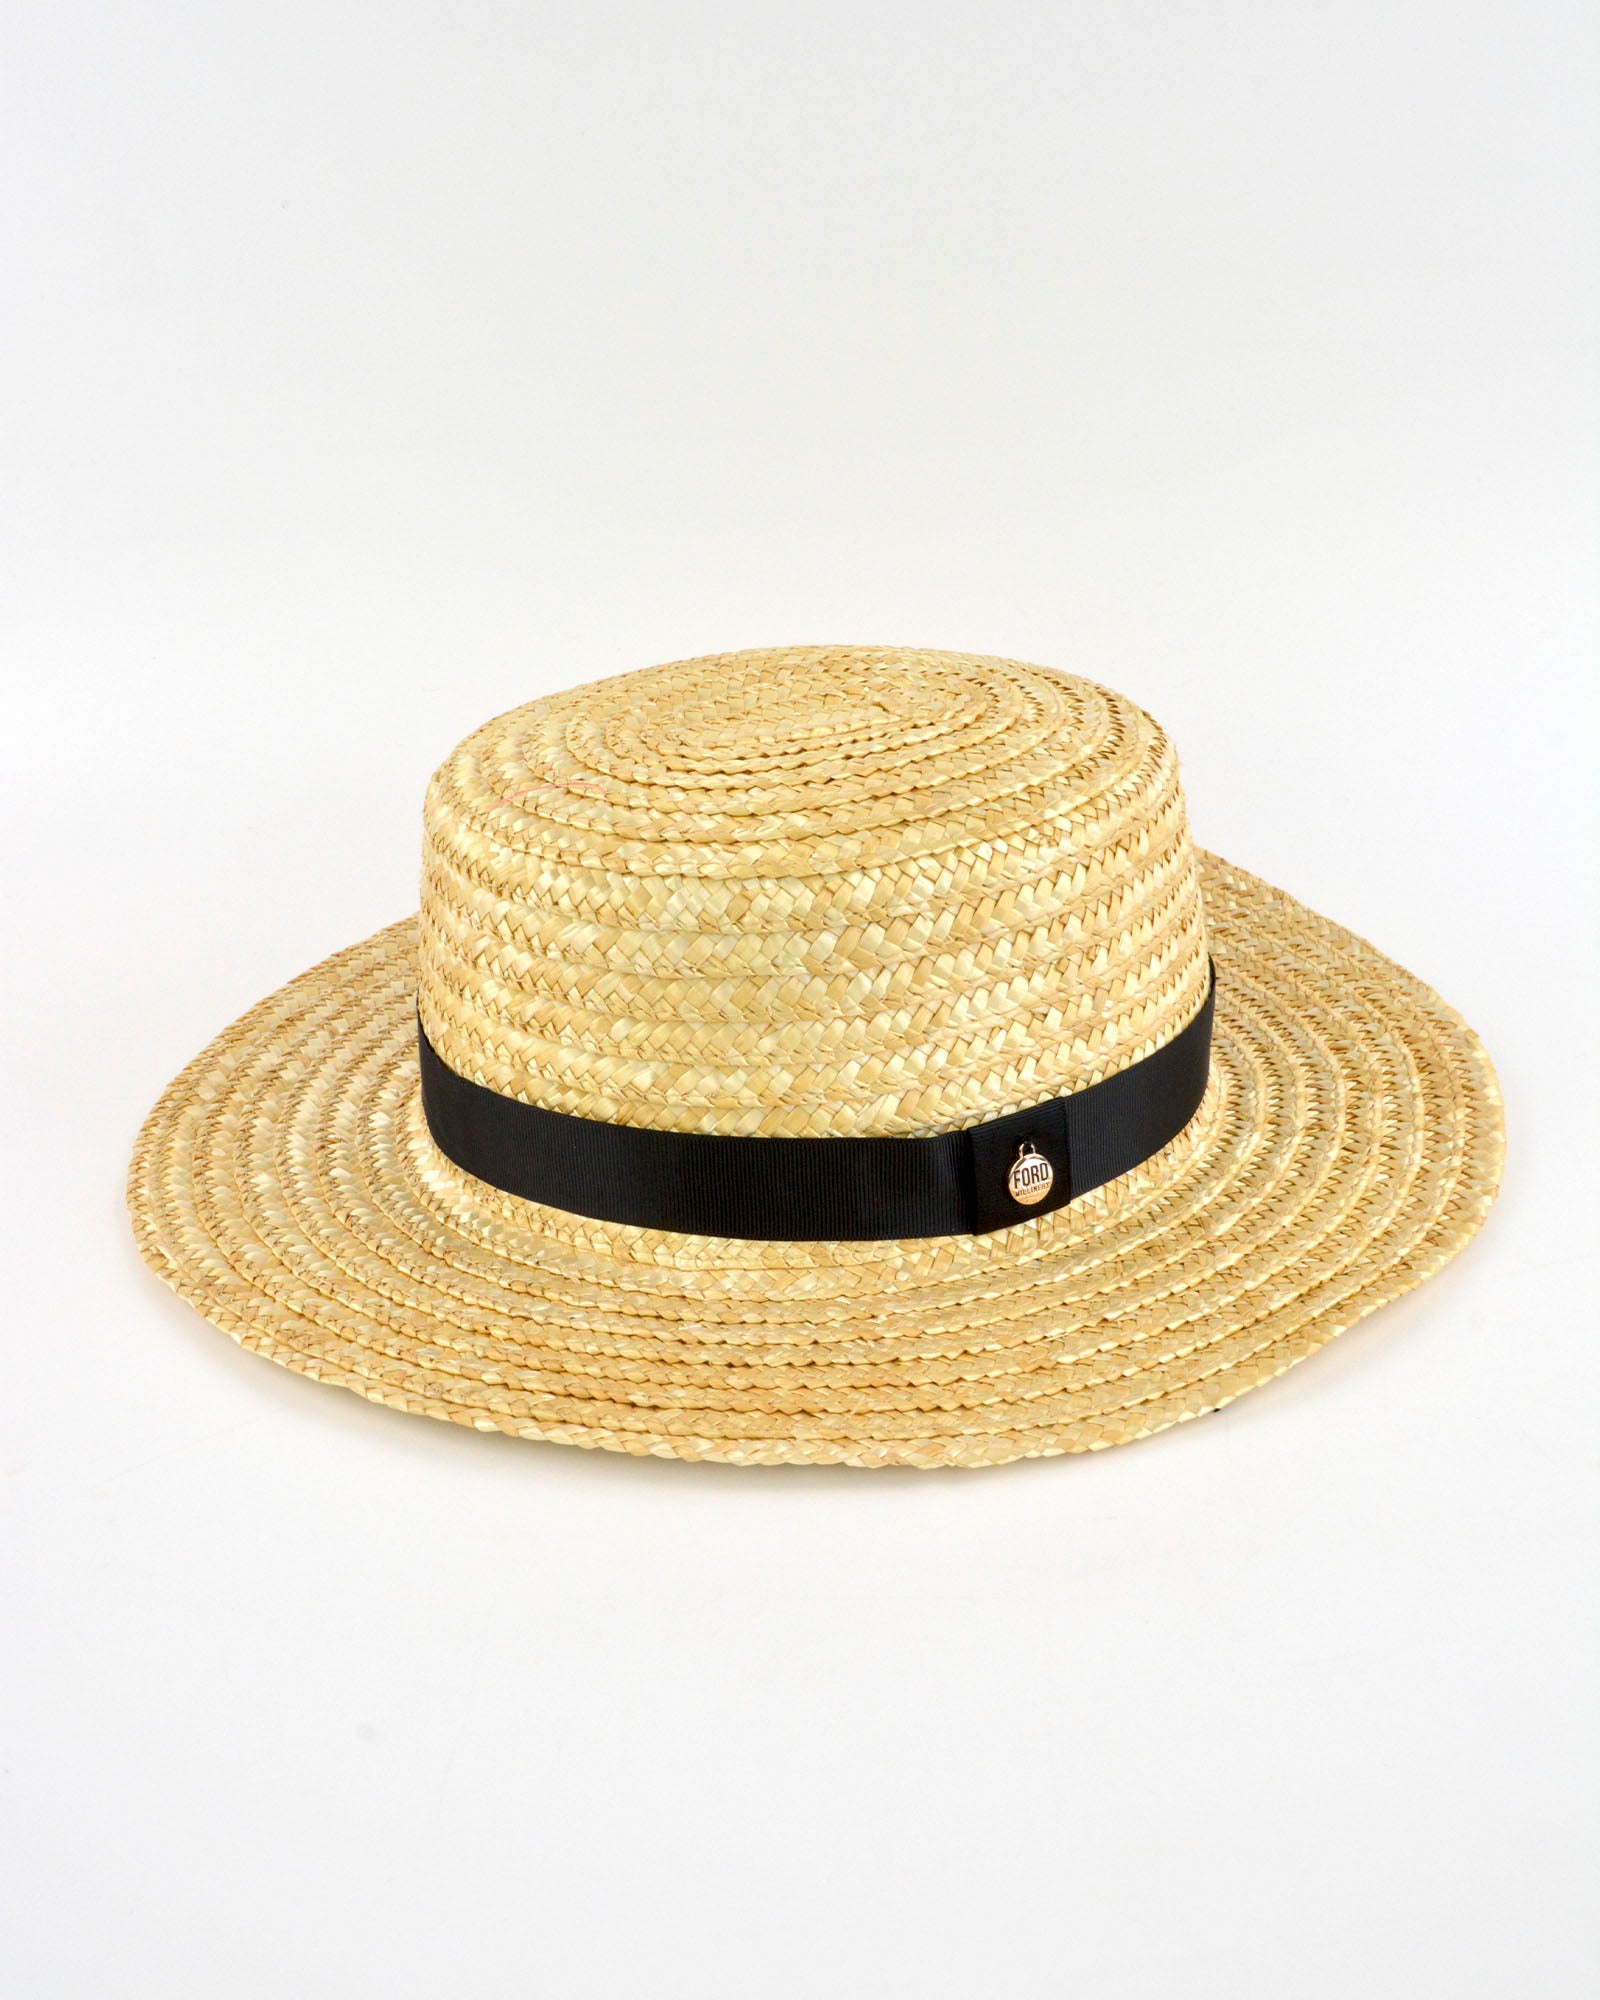 Straw hat - natural braided straw hat with wide band